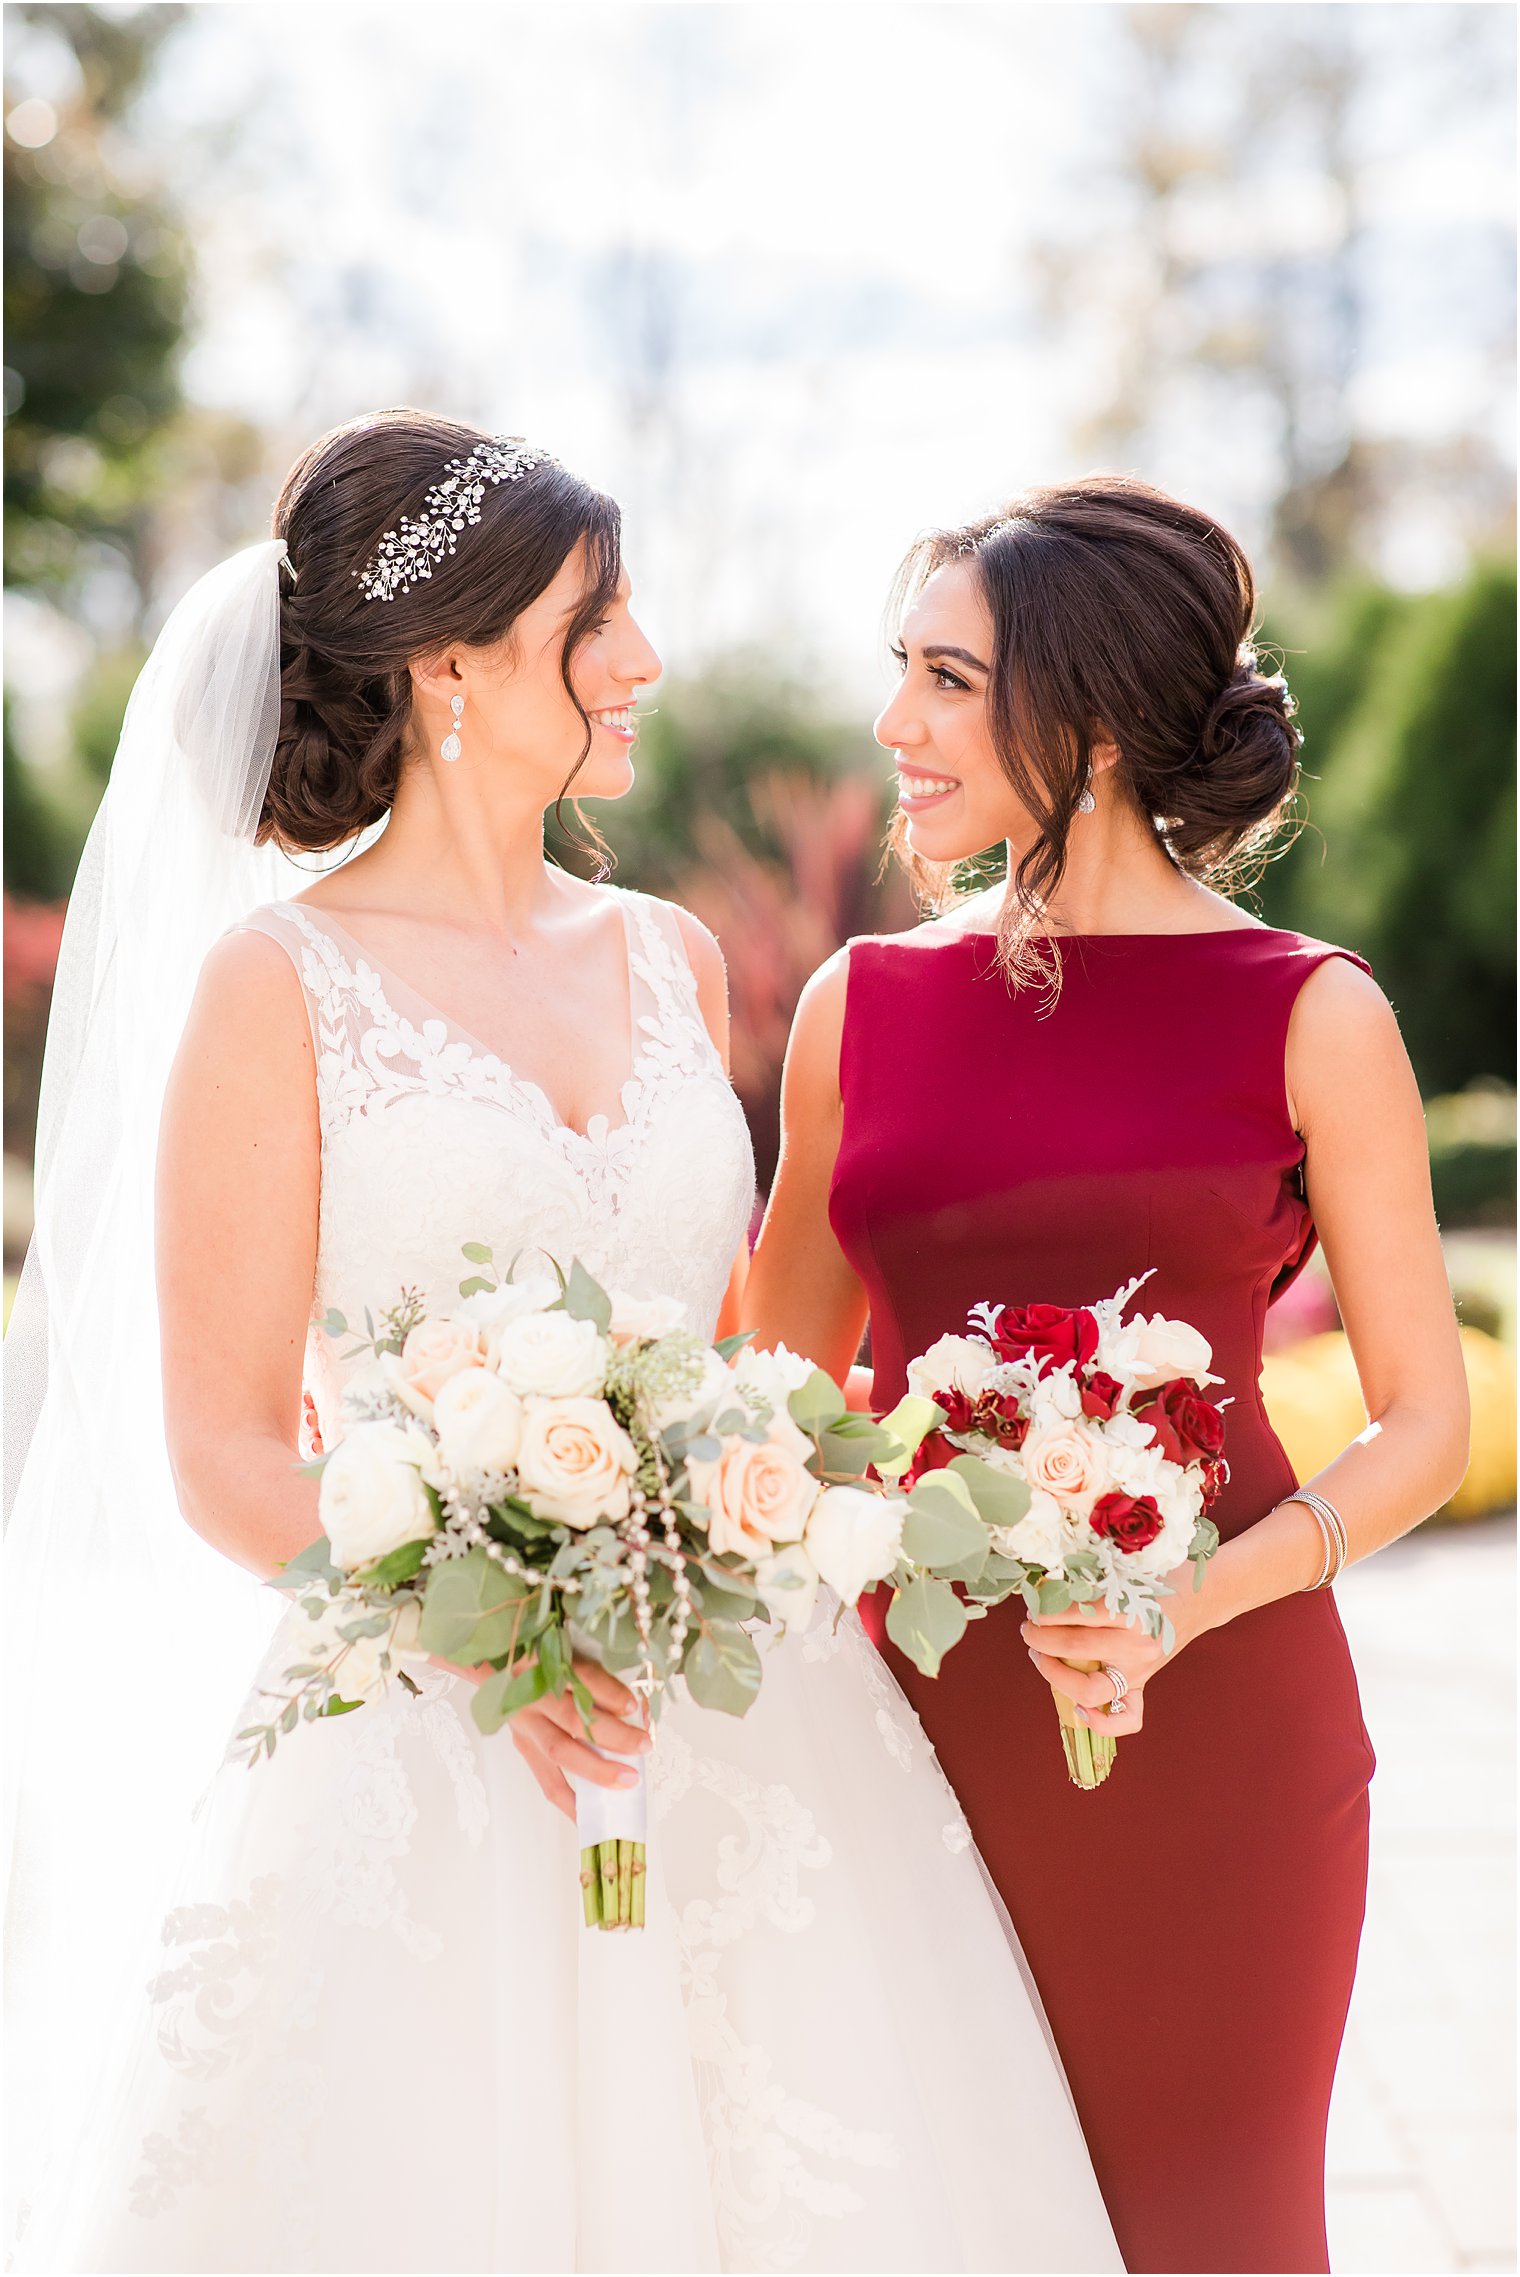 Bride and bridesmaid smiling at each other